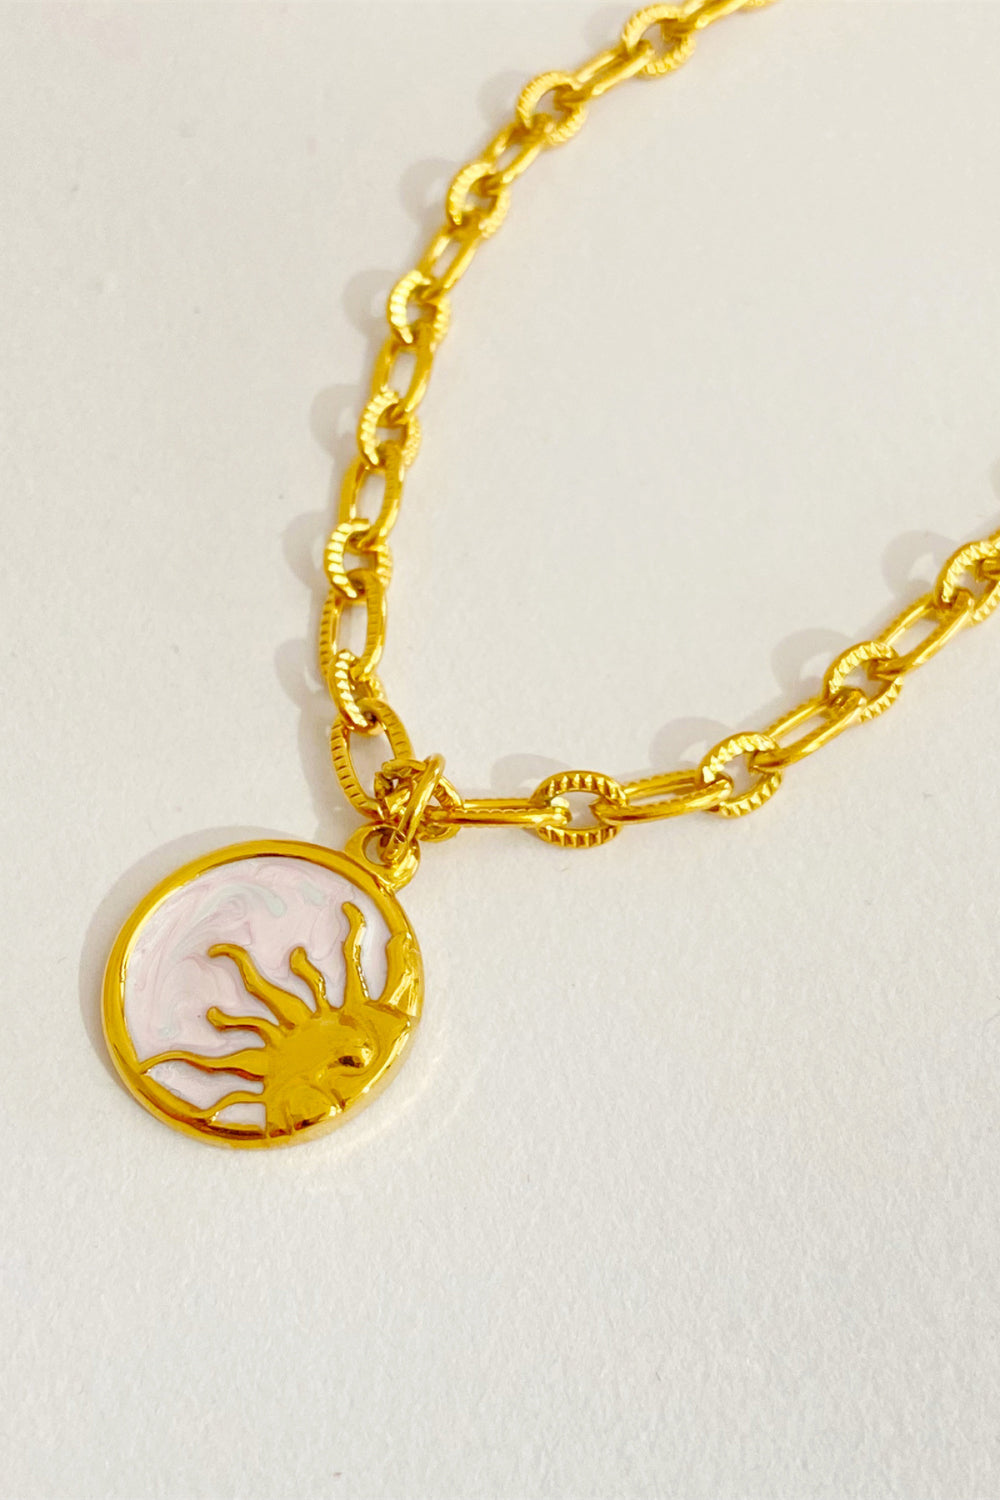 Classic Round Sun Moon Pendant Necklace - Stainless Steel + 18K Gold-Plated